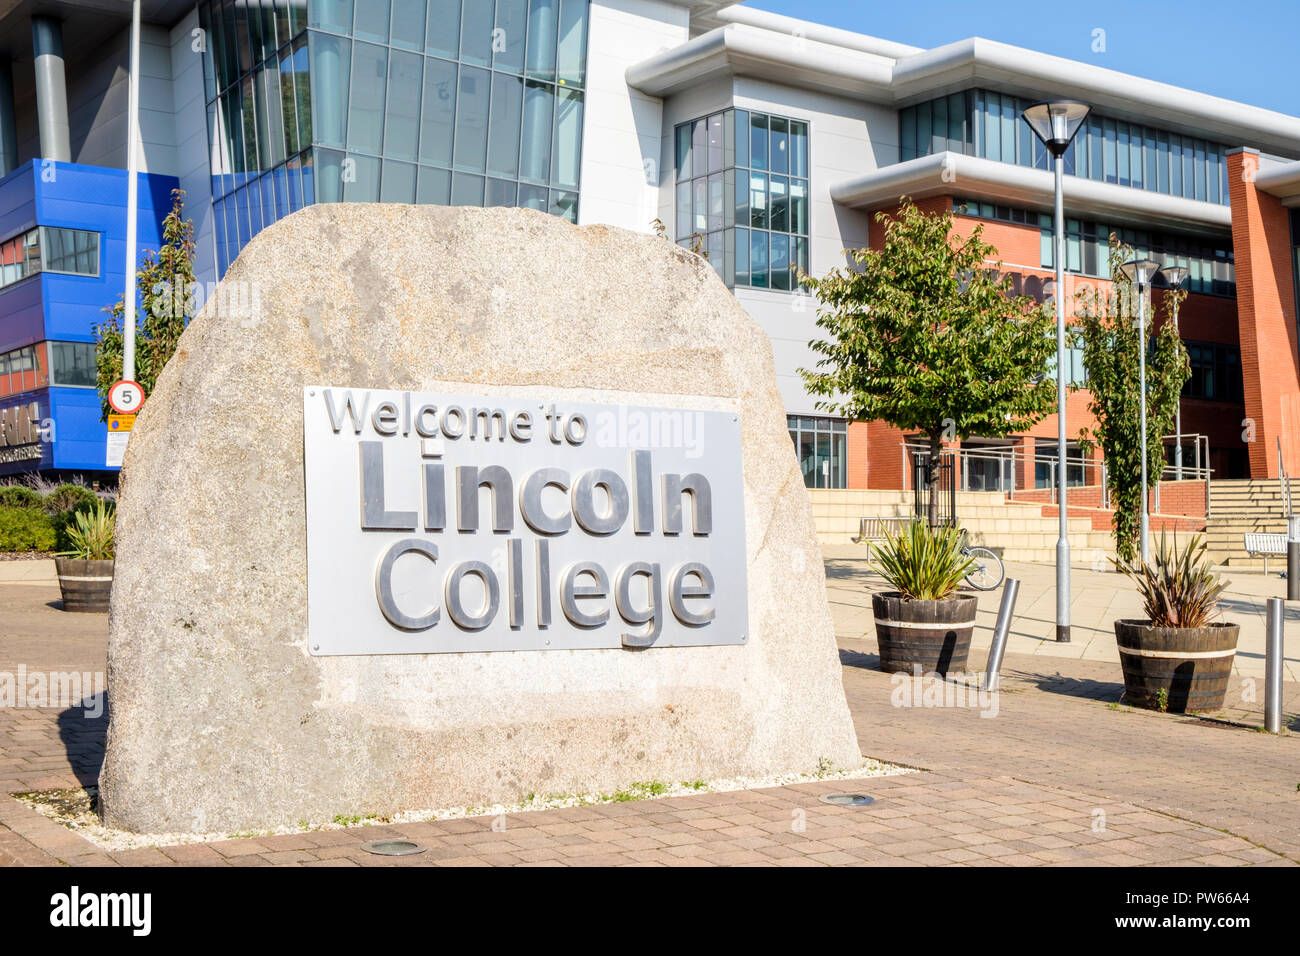 Lincoln College, Lincoln, Angleterre, RU Banque D'Images